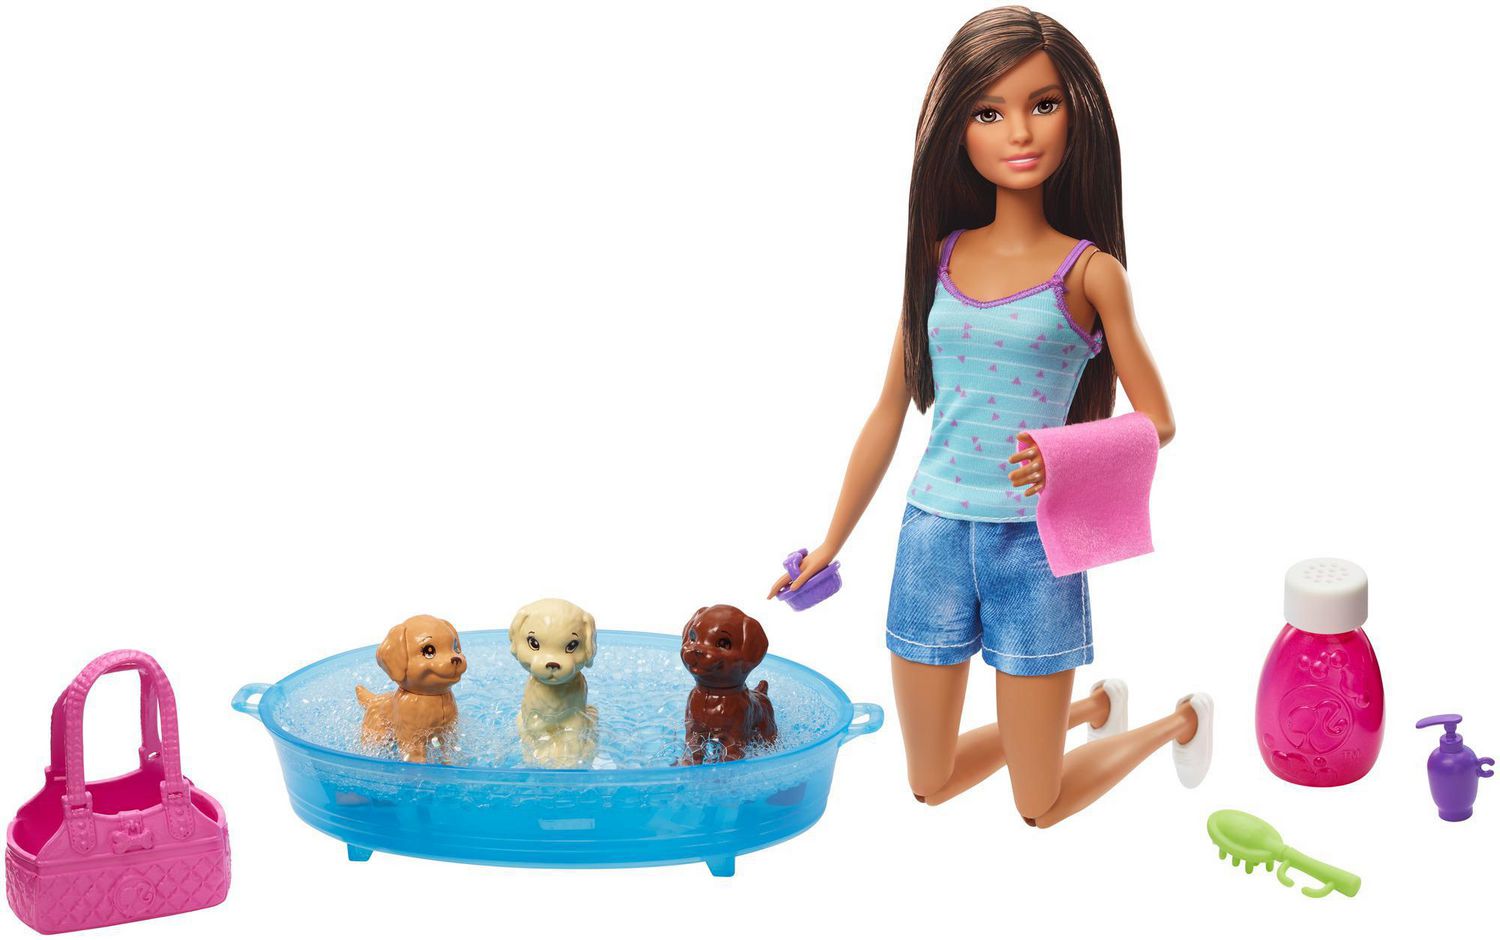 barbie doll with puppies